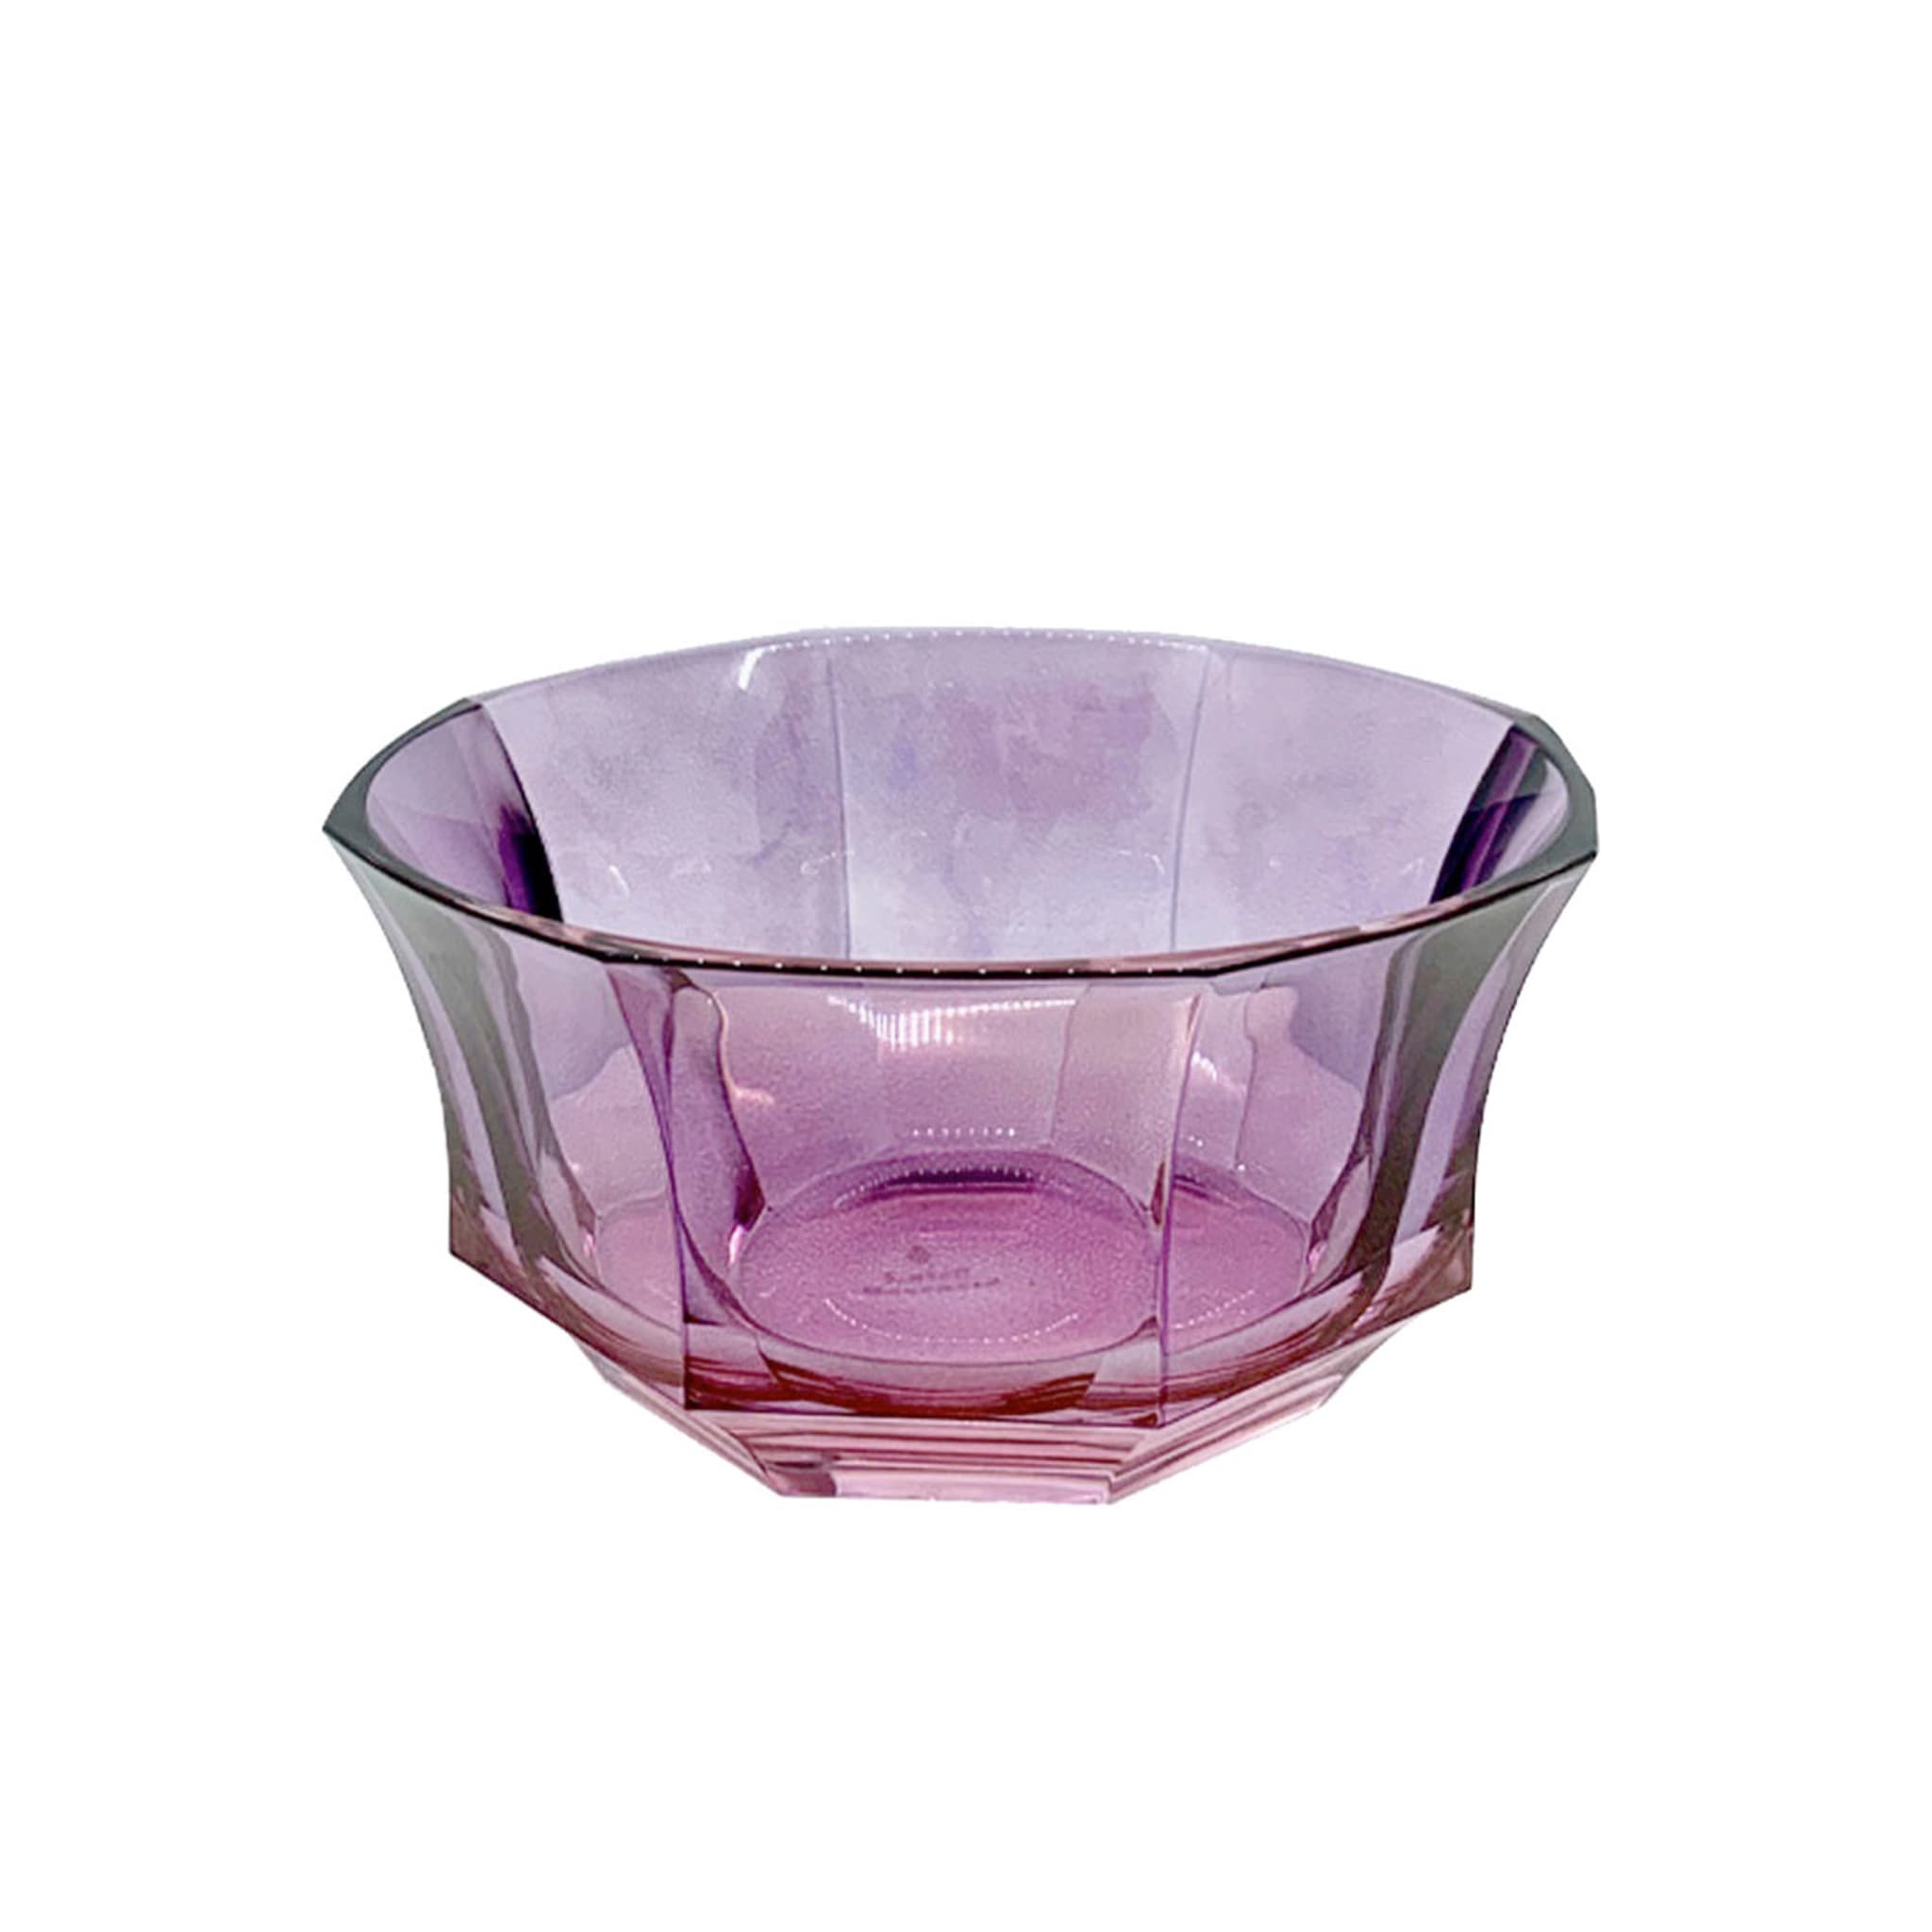 Faceted Pink-To-Purple Crystal Dessert Bowl - Alternative view 1